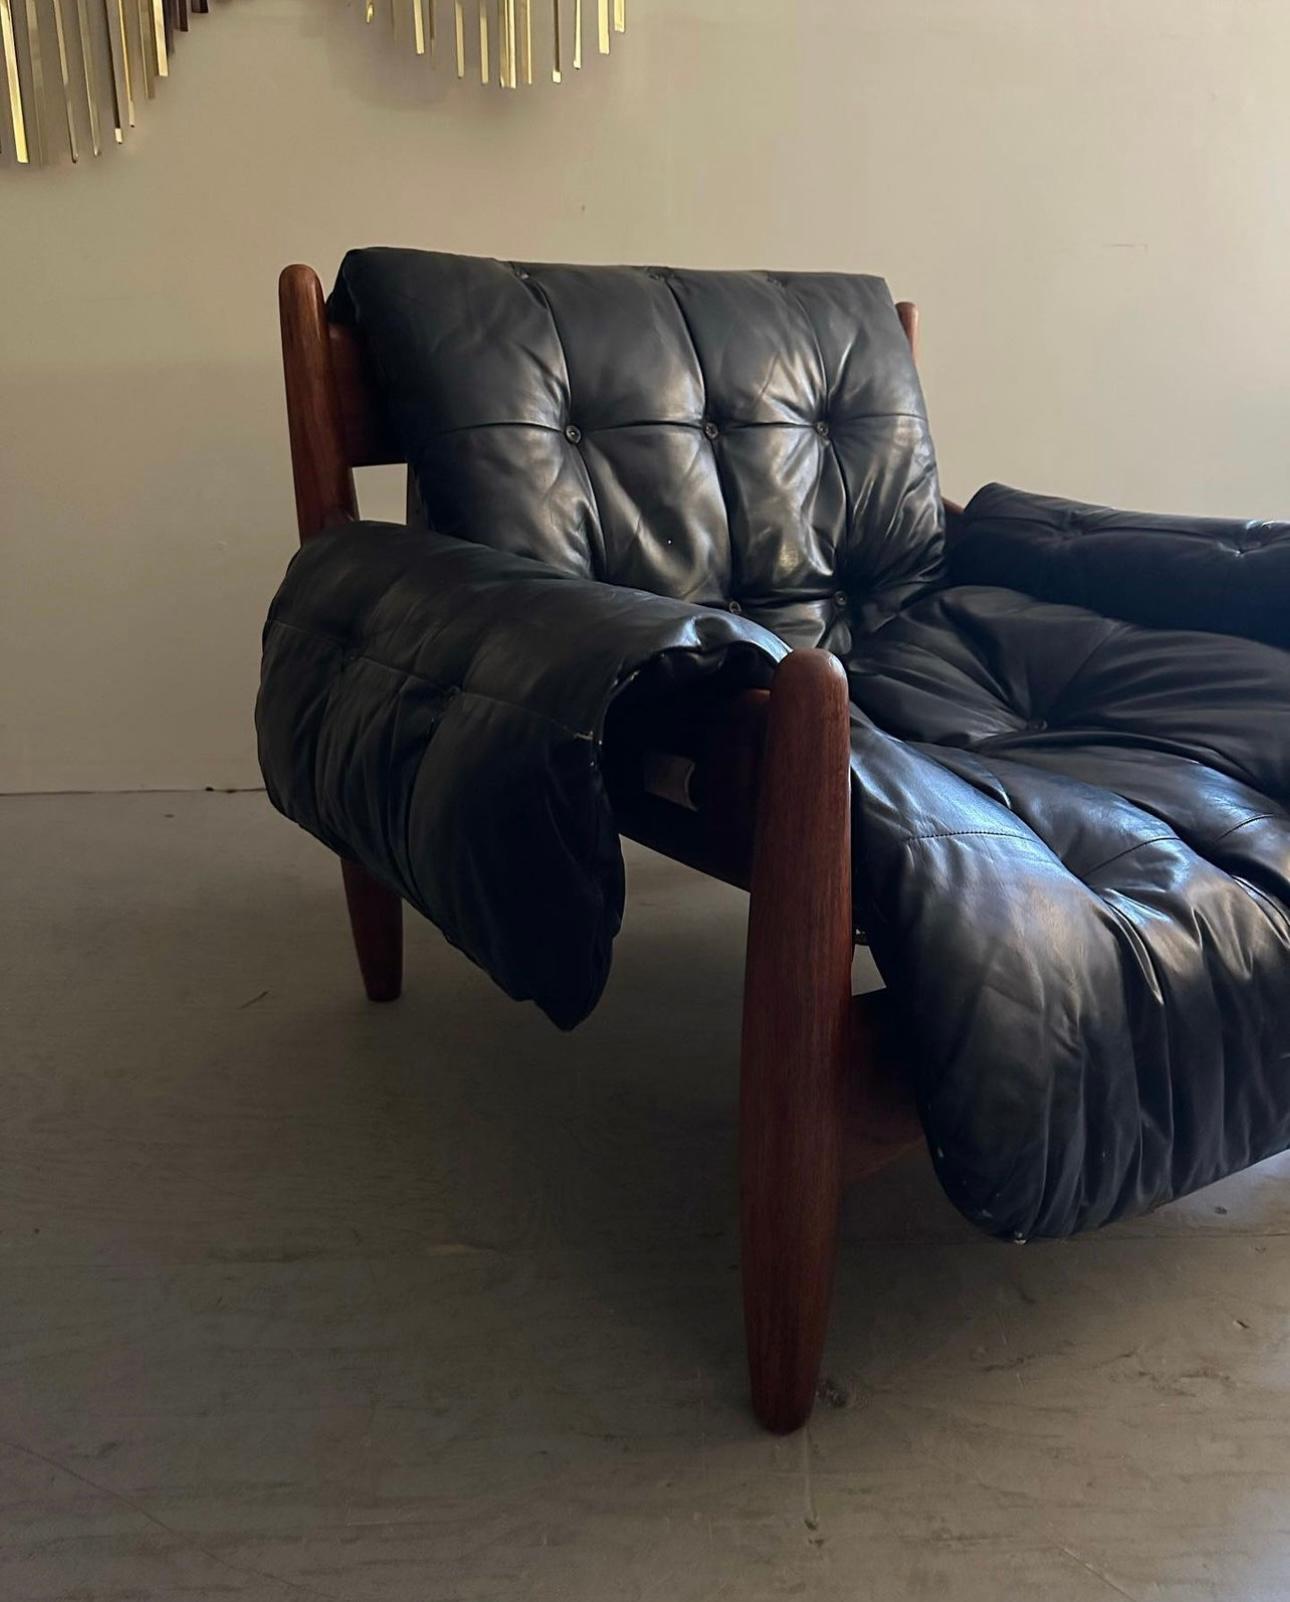 Midcentury Brazilian Modern “Sheriff” Lounge Chair Designed by Sergio Rodrigues In Good Condition For Sale In Union City, NJ